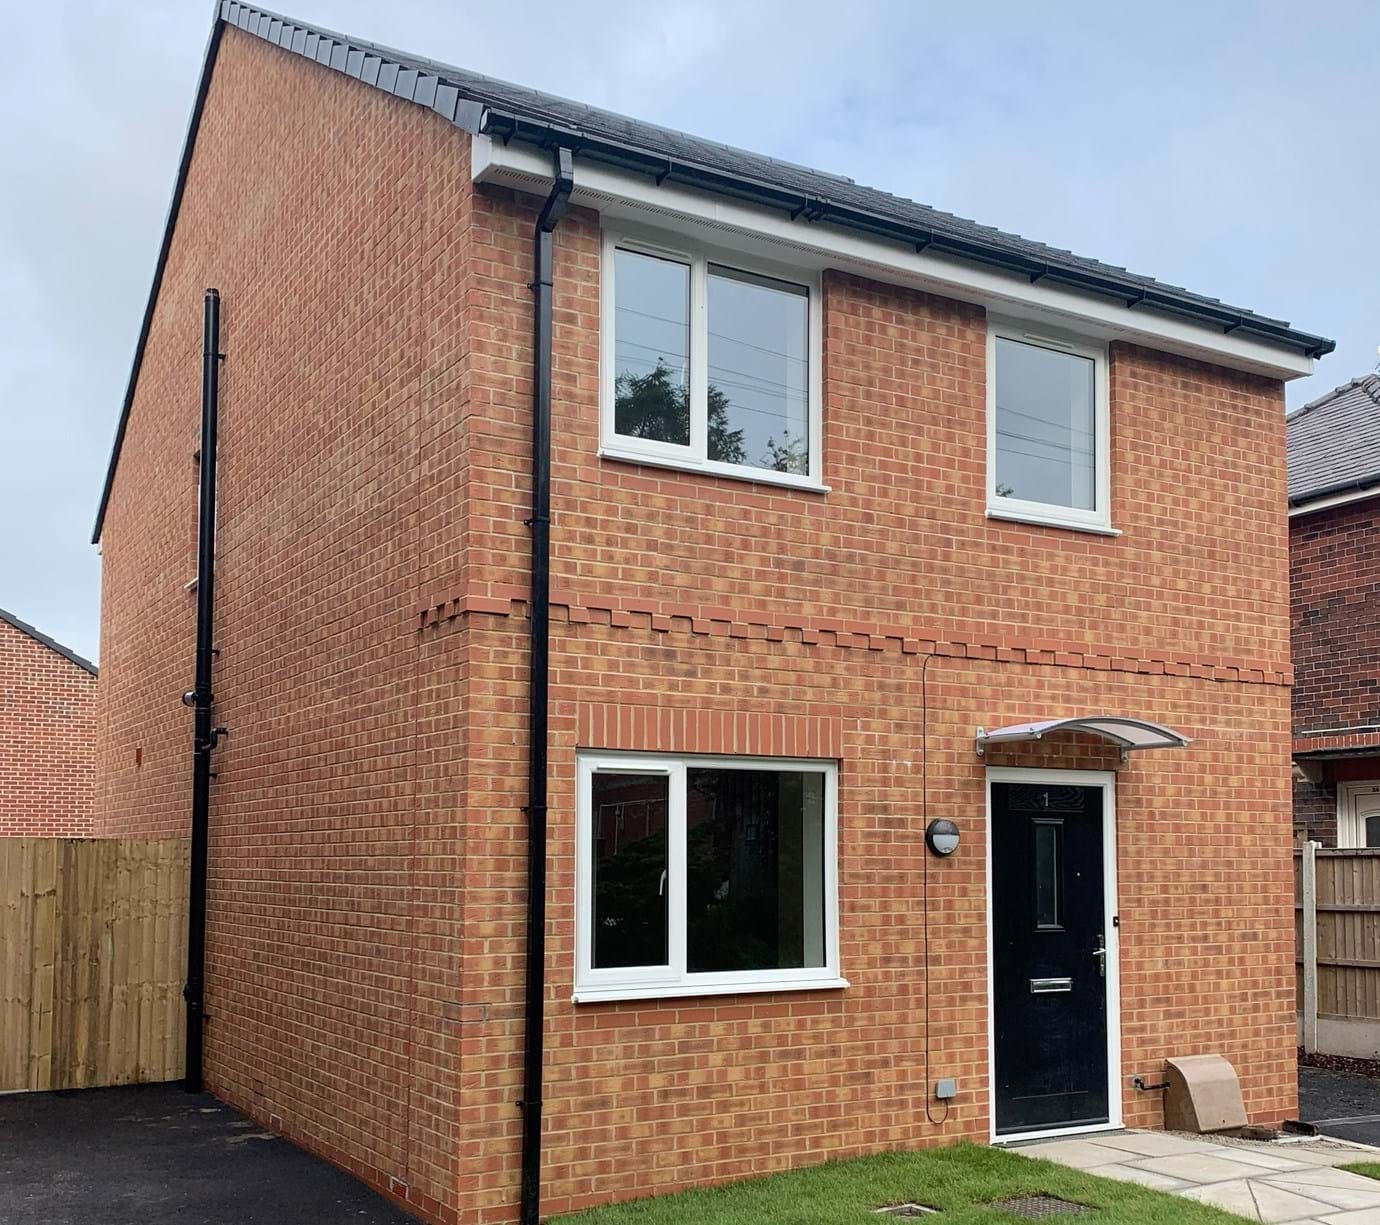 The Royley scheme comprises 15 new properties which are a mixture of three and four bedroom family homes. All are for affordable rent.